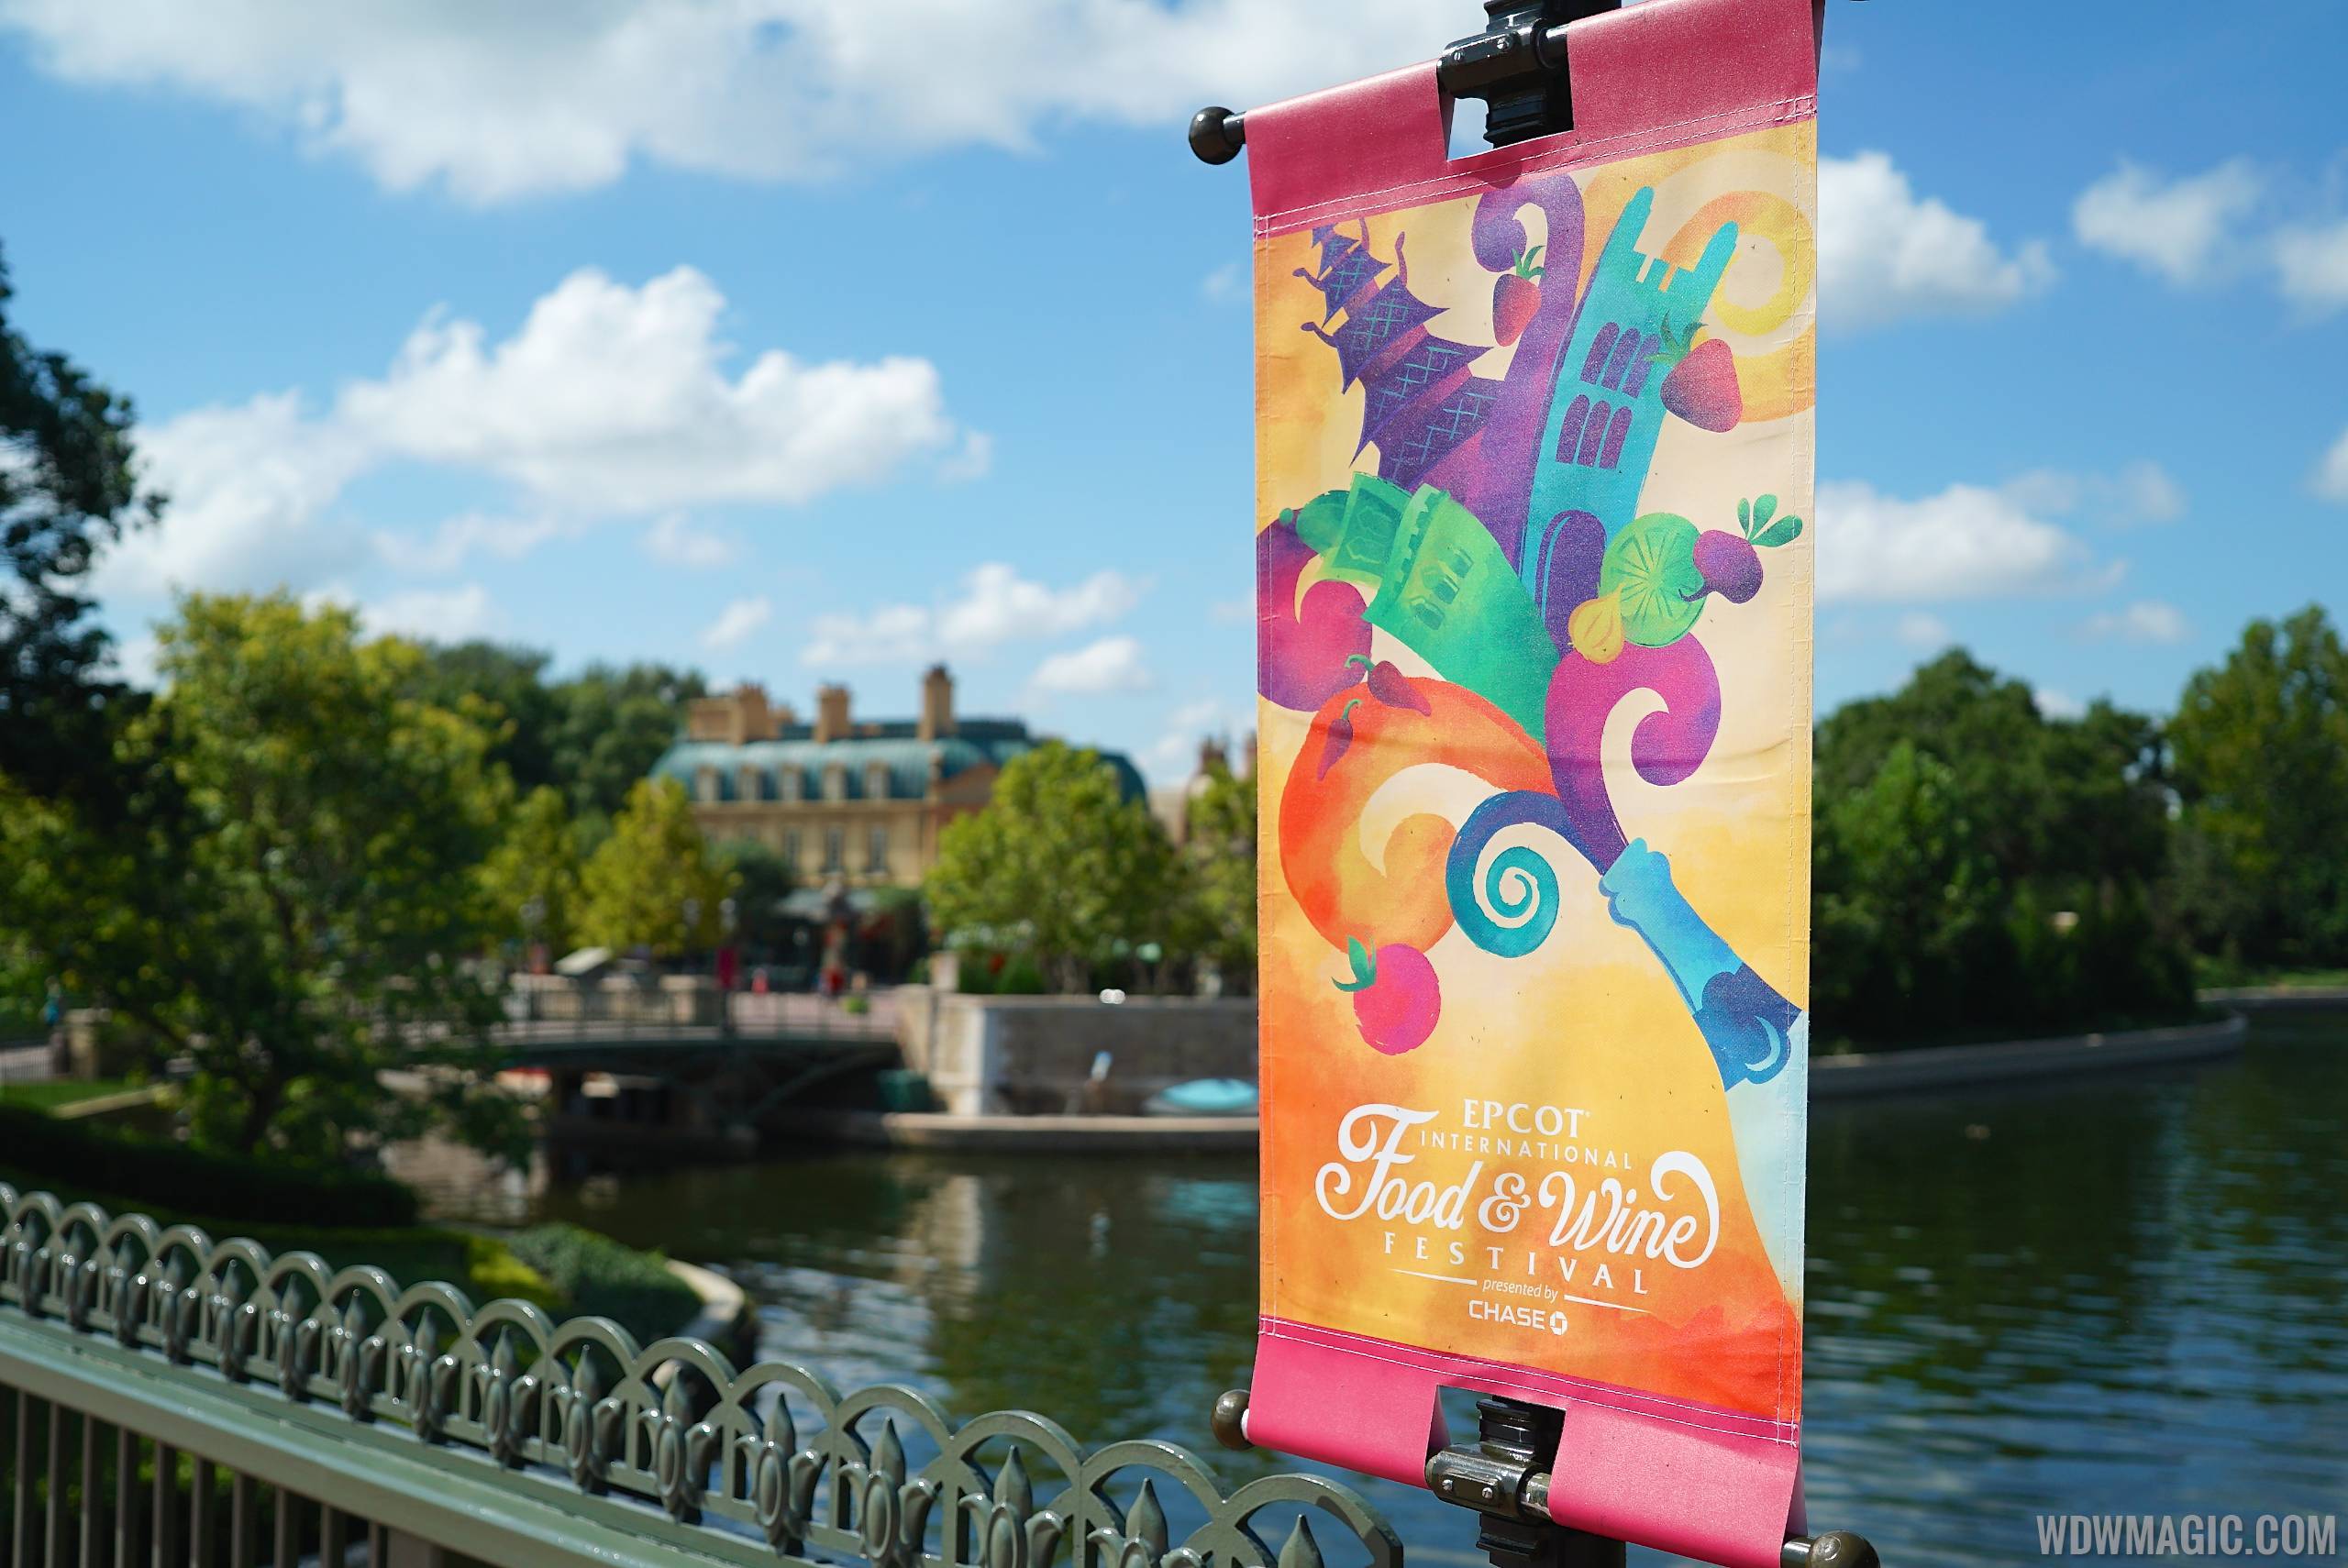 PHOTOS - Main entrance decor for the 2014 Epcot International Food and Wine Festival